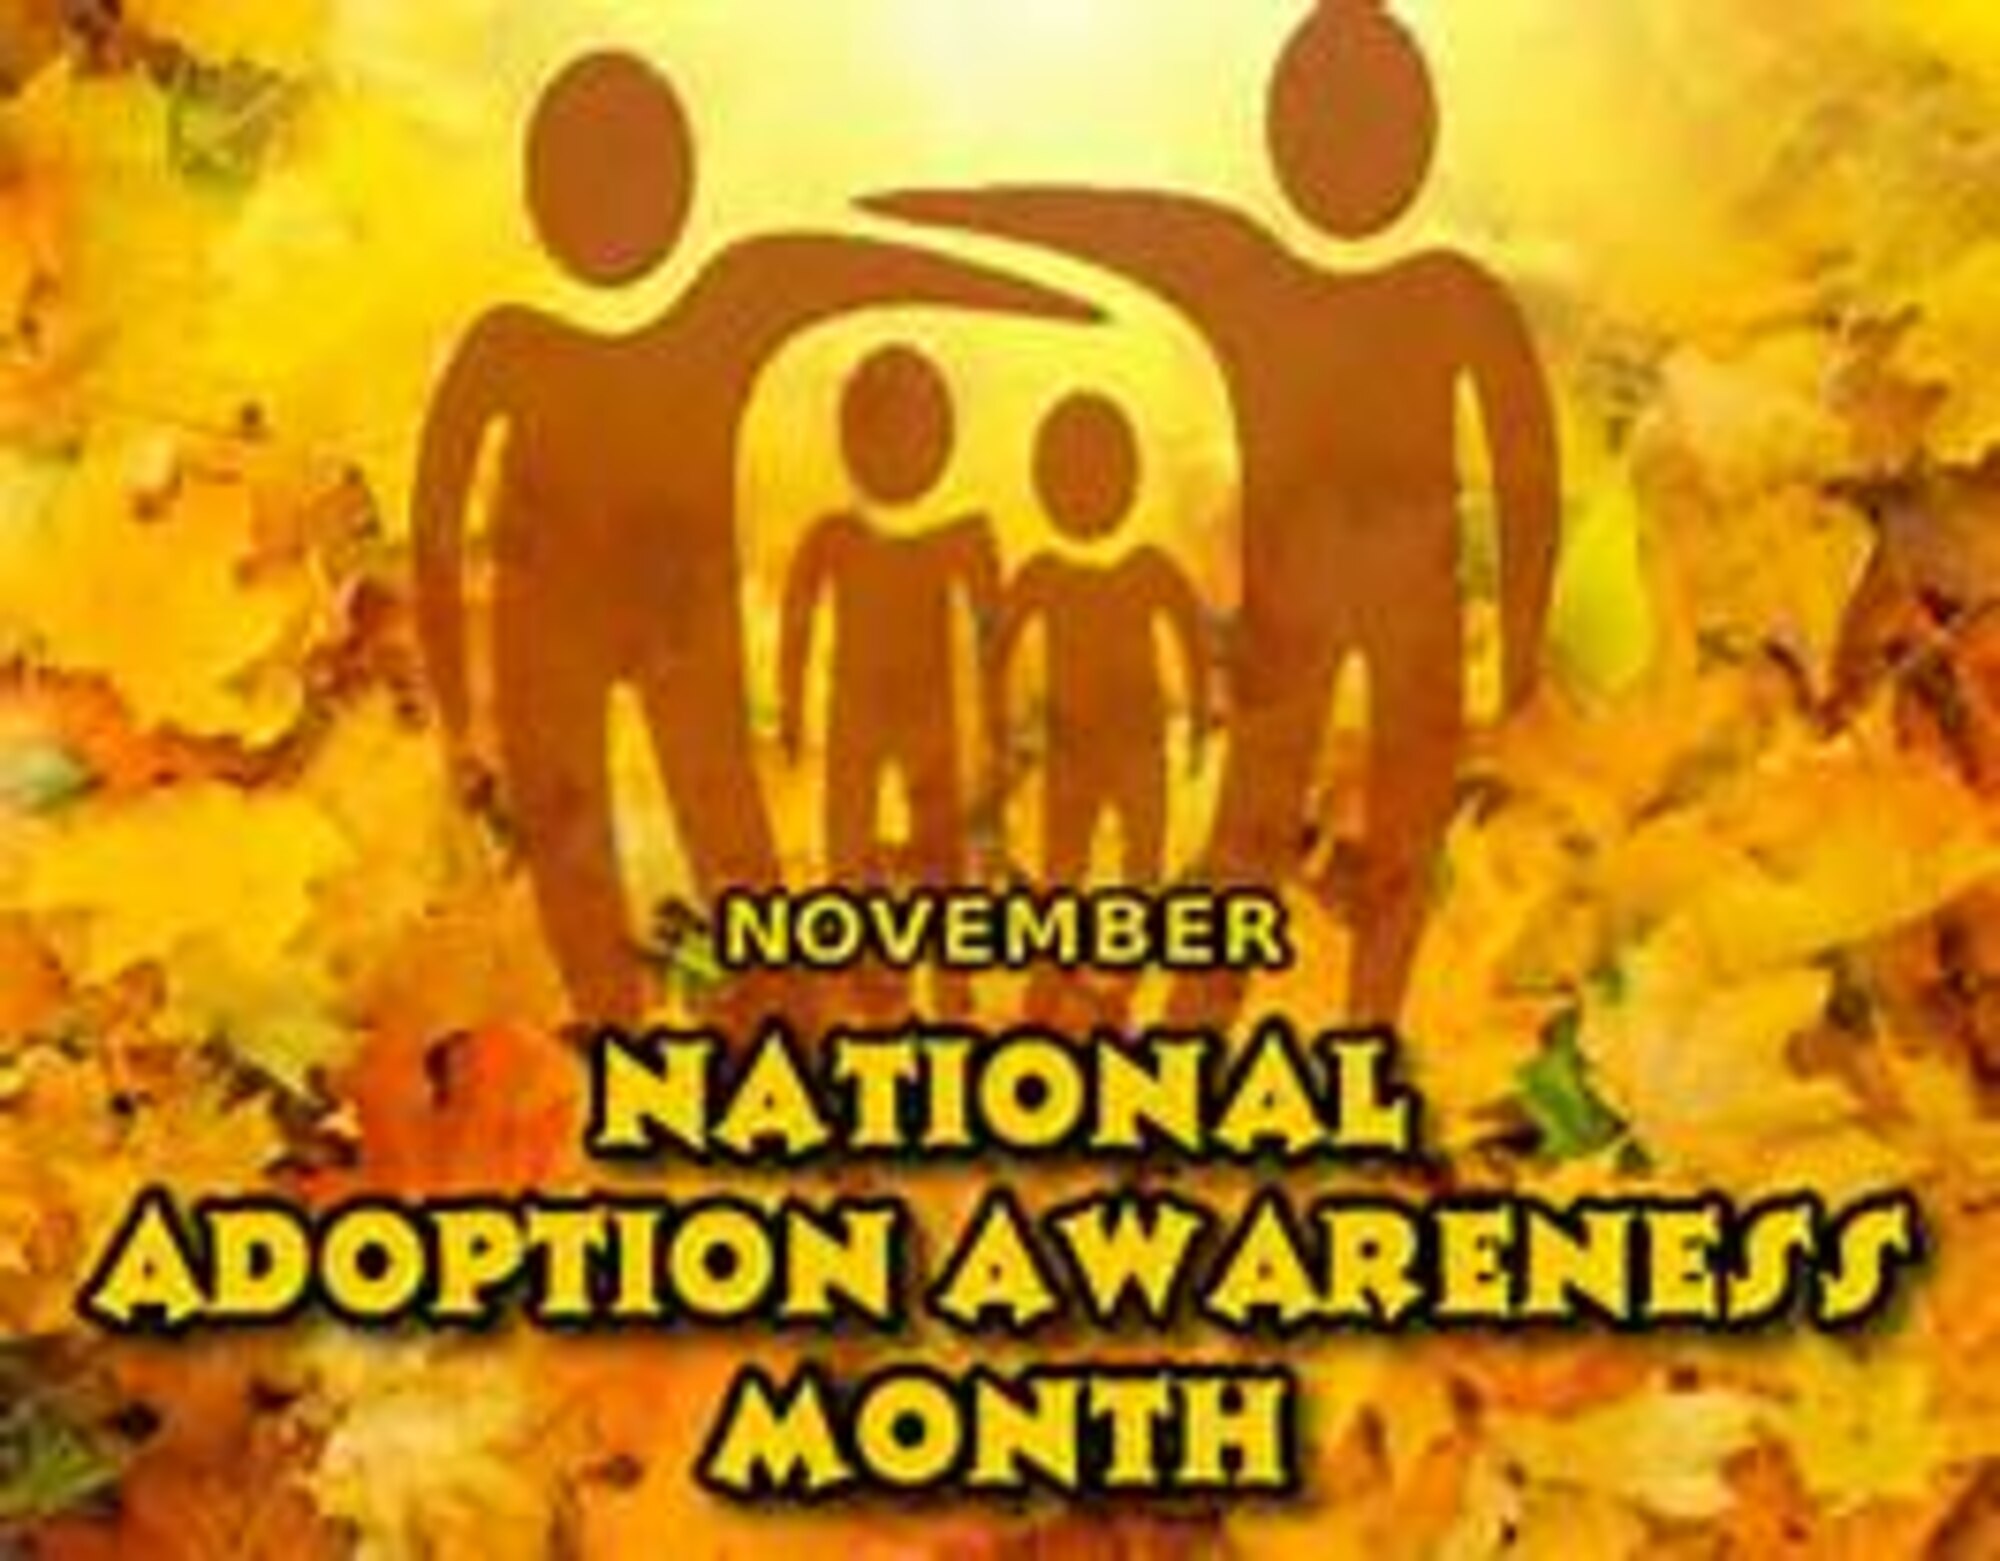 National Adoption Awareness Month is observed every November to direct attention to the tens of thousands of children in the United States who await a permanent, loving family.